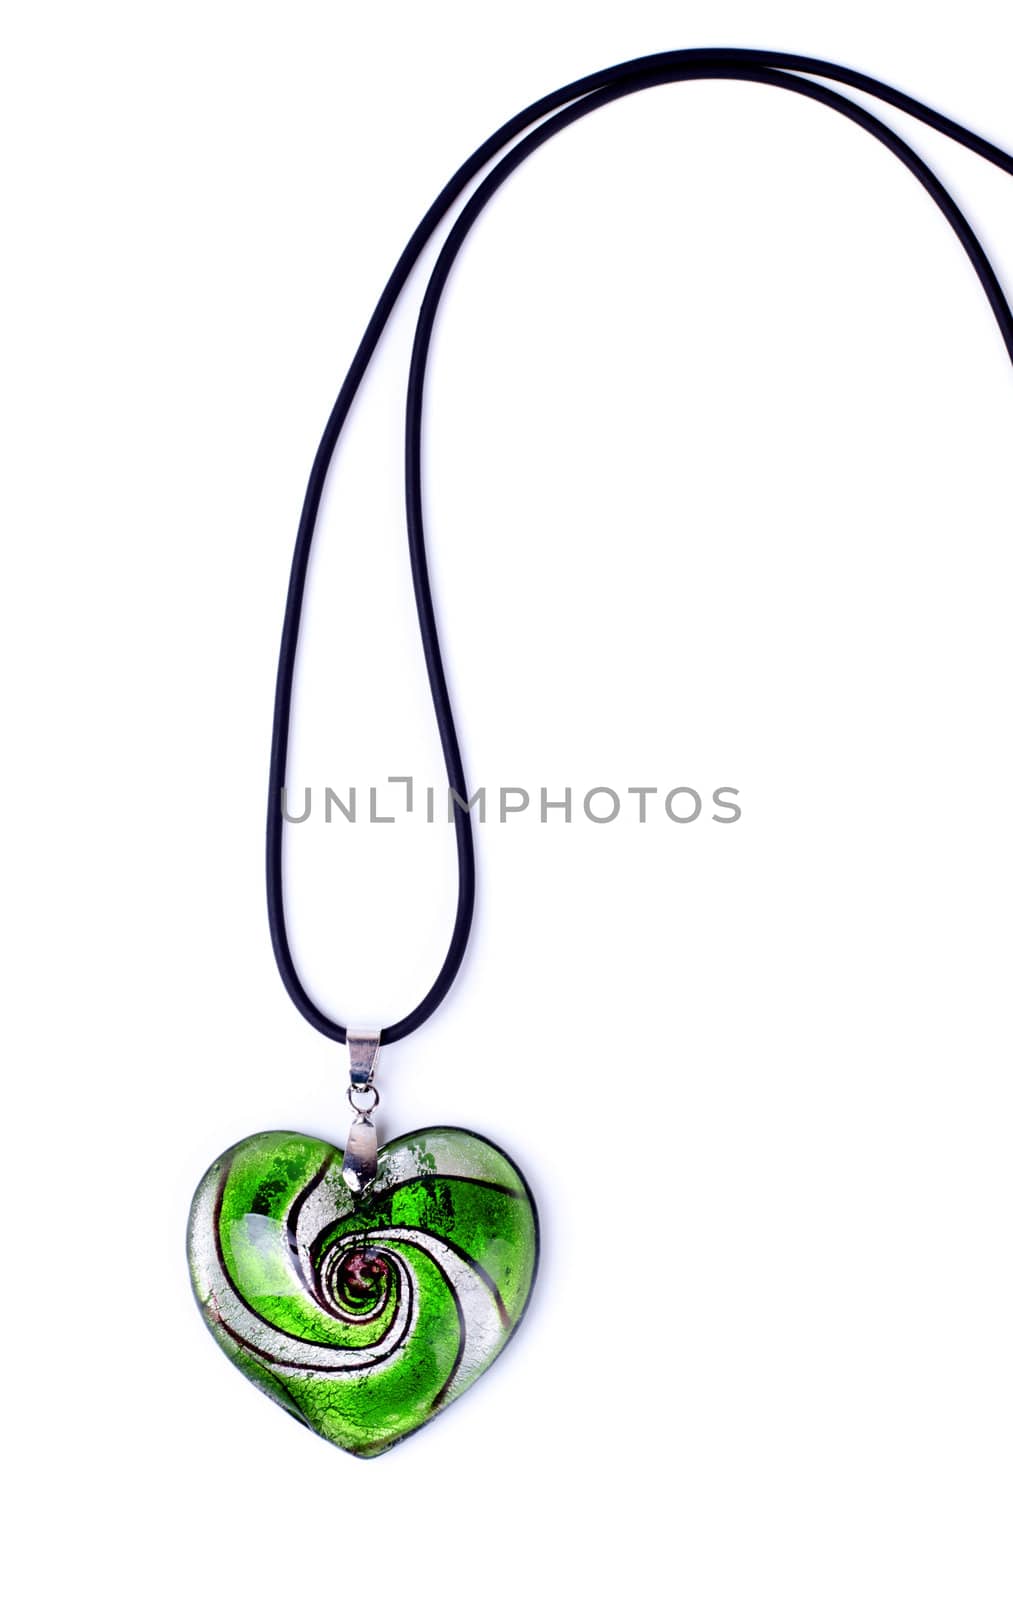 green heart-shaped pendant isolated on white background